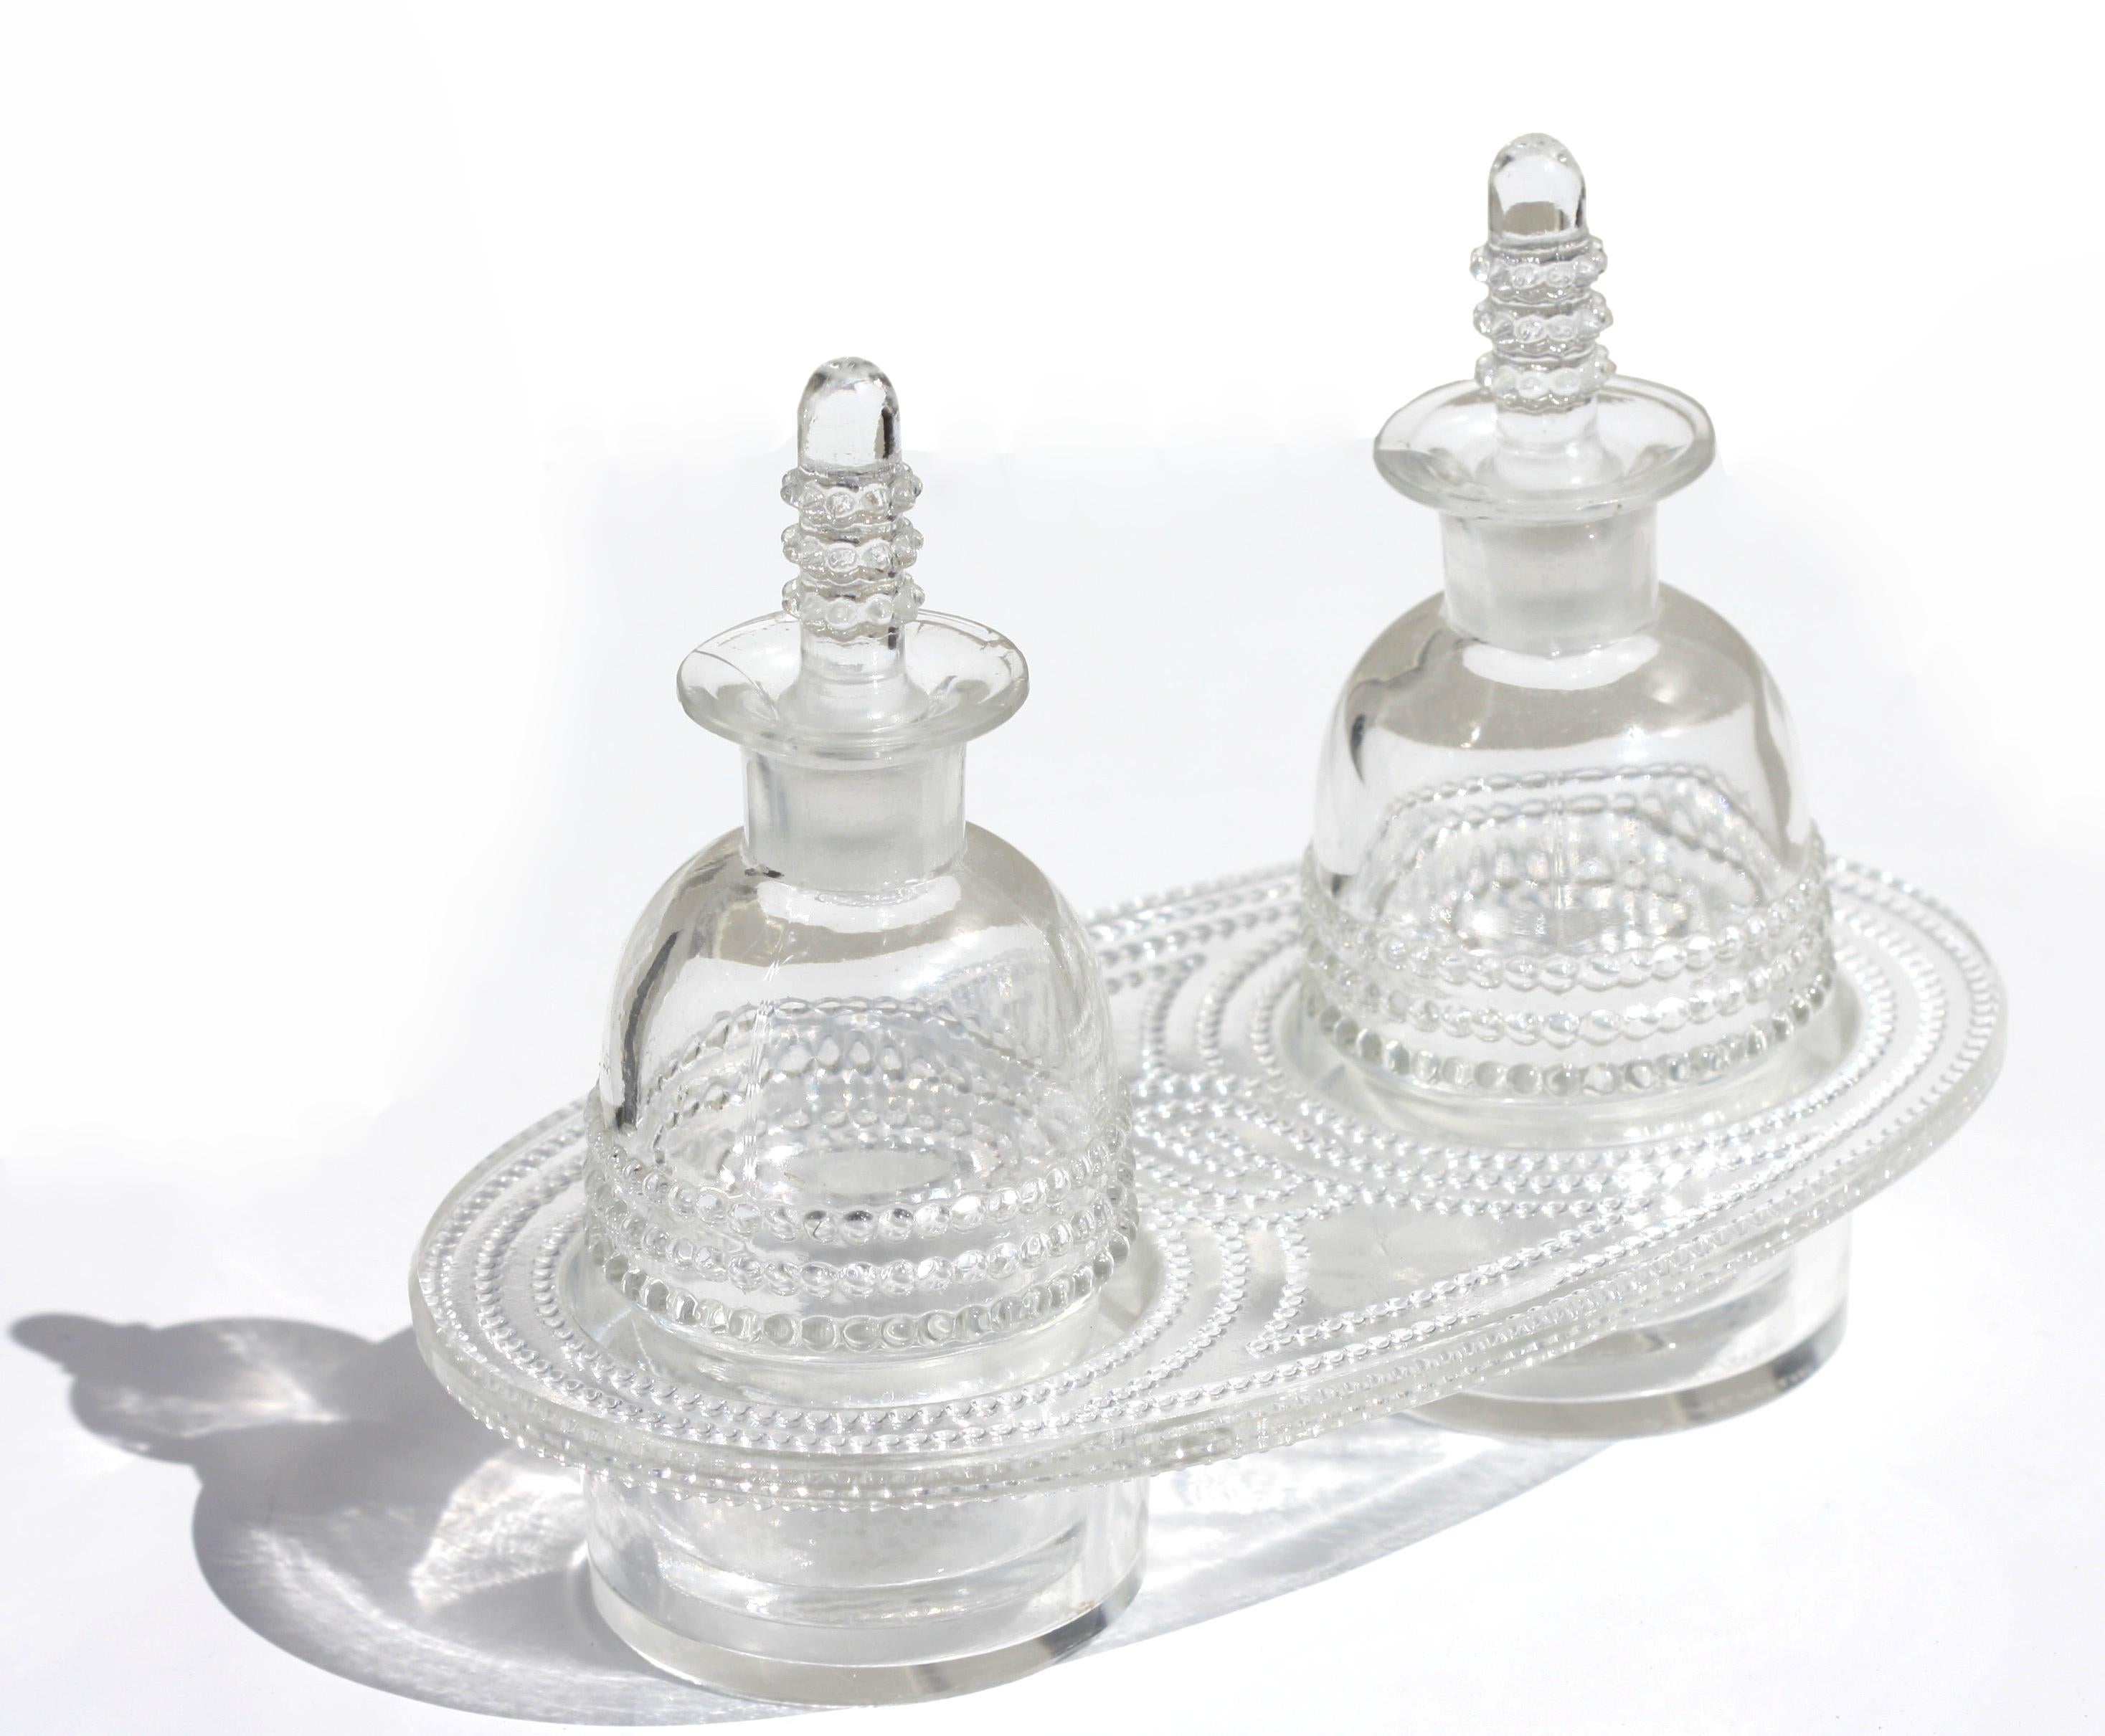 Rene Lalique (1860-1945)
Nippon et Tokyo
A R.Lalique glass oil and vinegar set
circa 1933
Marcilhac 3896
4.5 in. (11.43 cm) high
6.25 in. (15.88 cm.) wide
acid stamped R. Lalique.
 